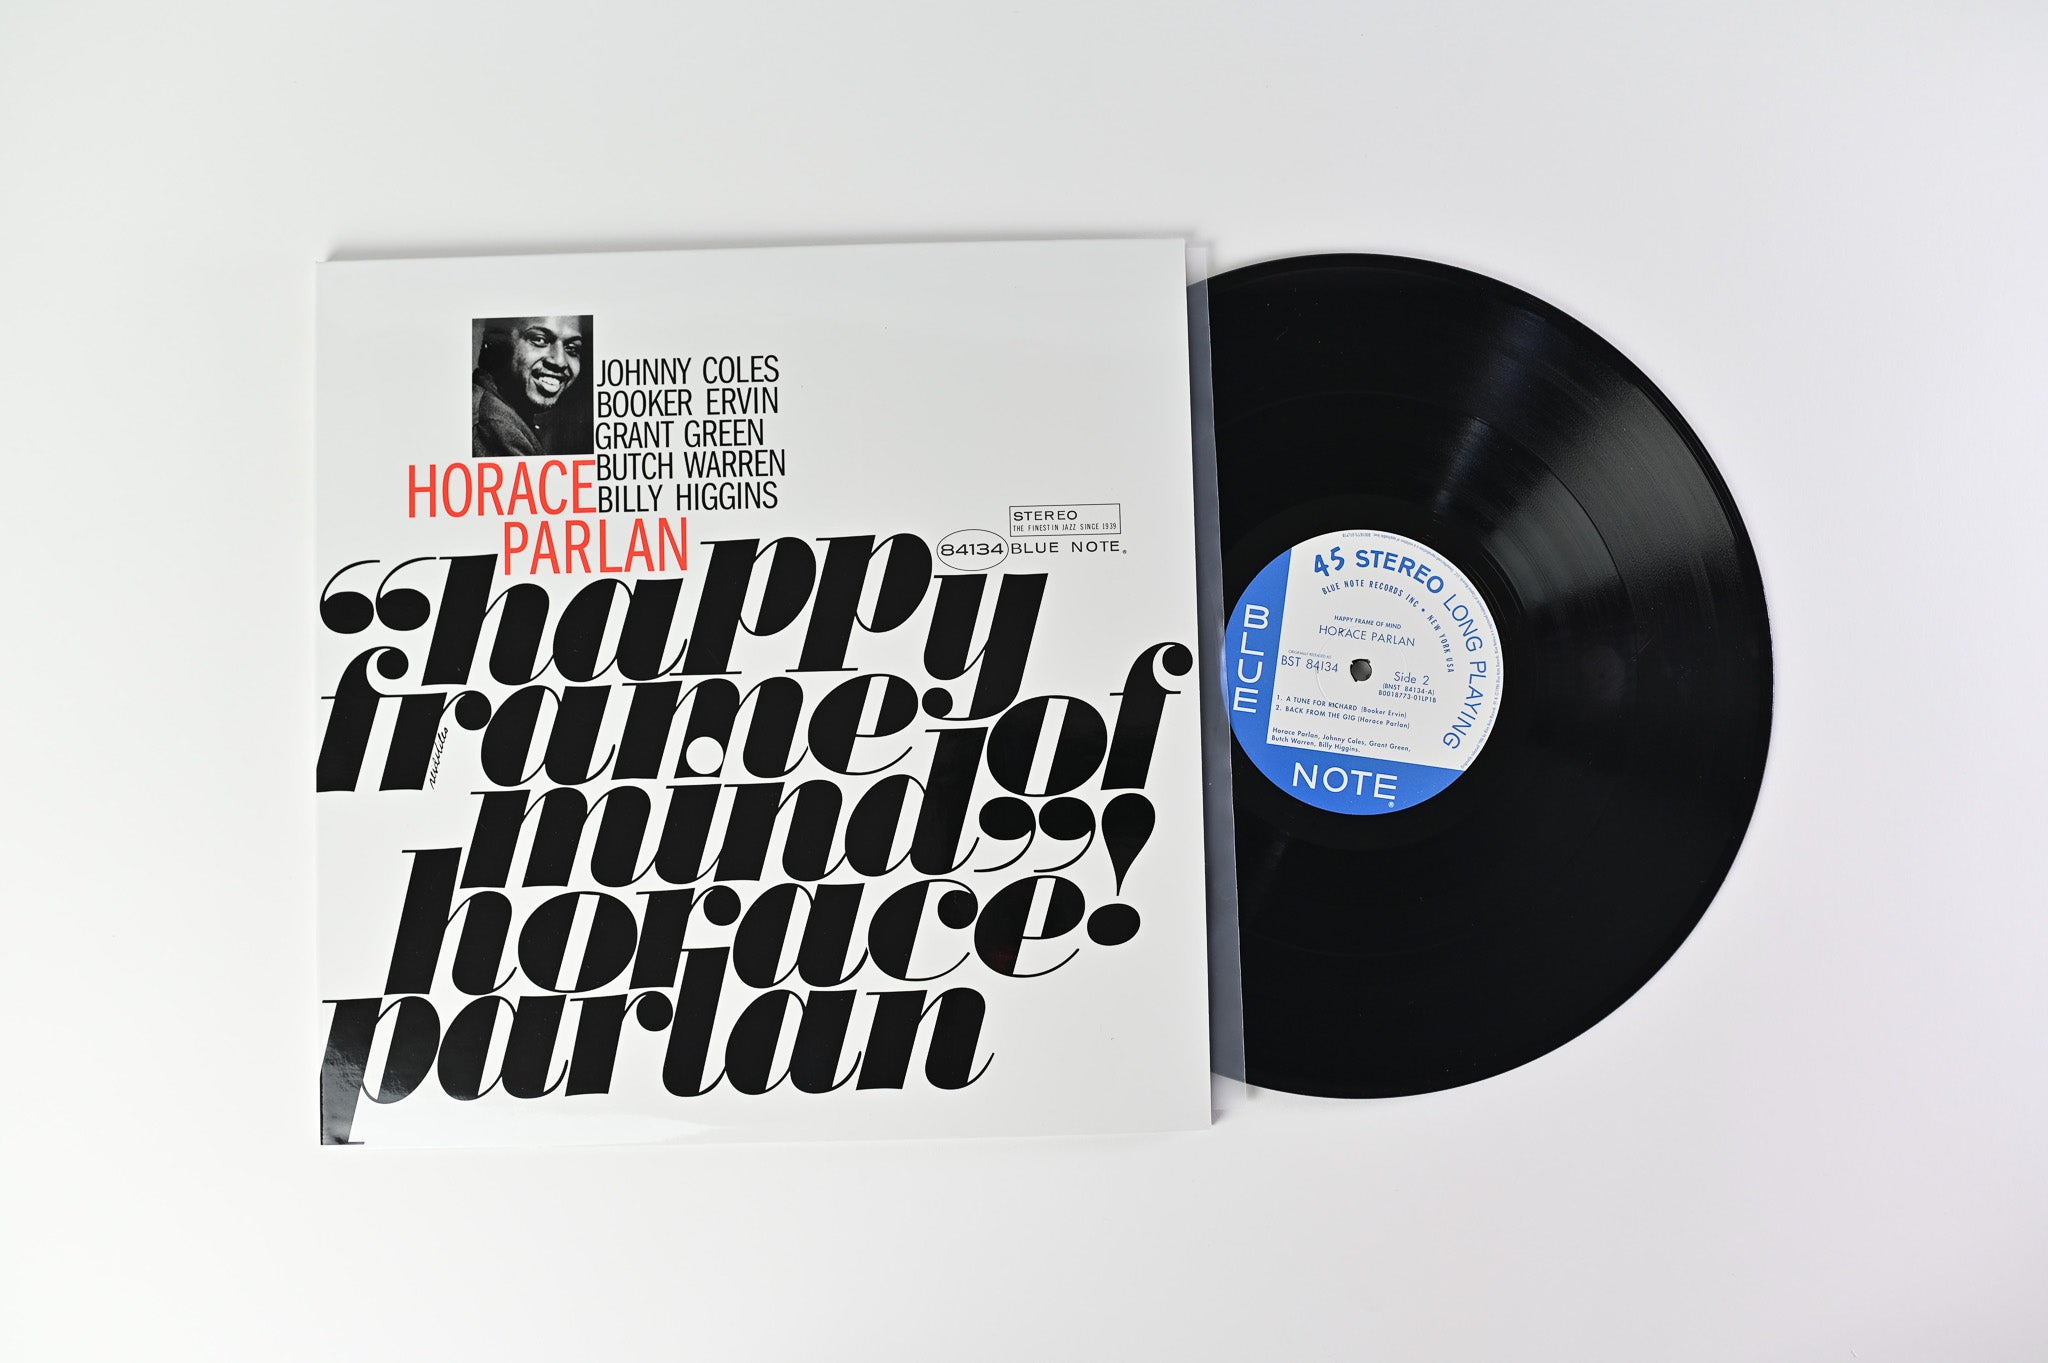 Horace Parlan - Happy Frame Of Mind on Blue Note Music Matters Ltd Reissue 45 RPM